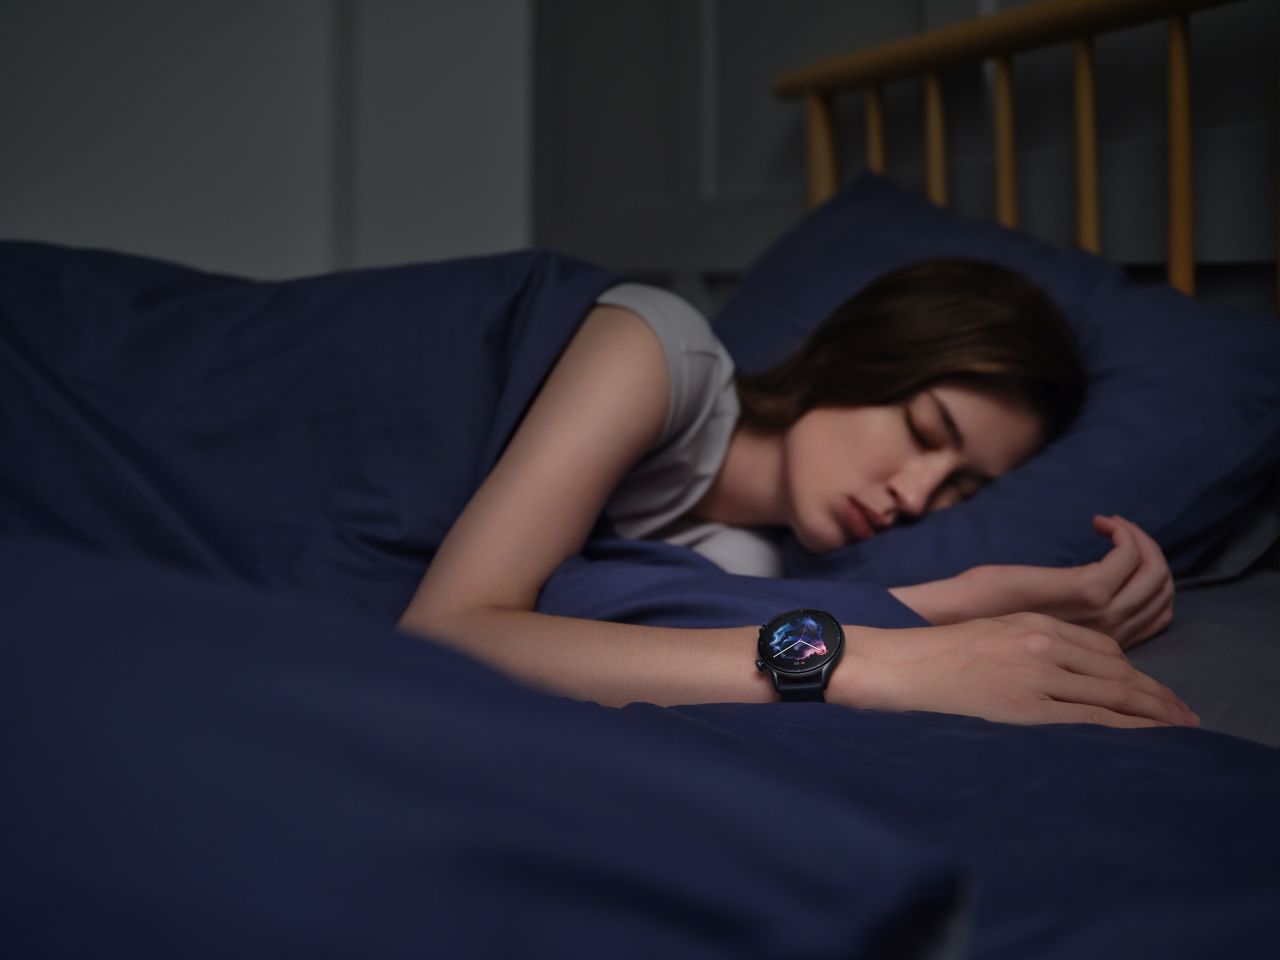 The GTR 3 can monitor light, deep and REM sleep stages, and sleep data can be checked on the watch itself